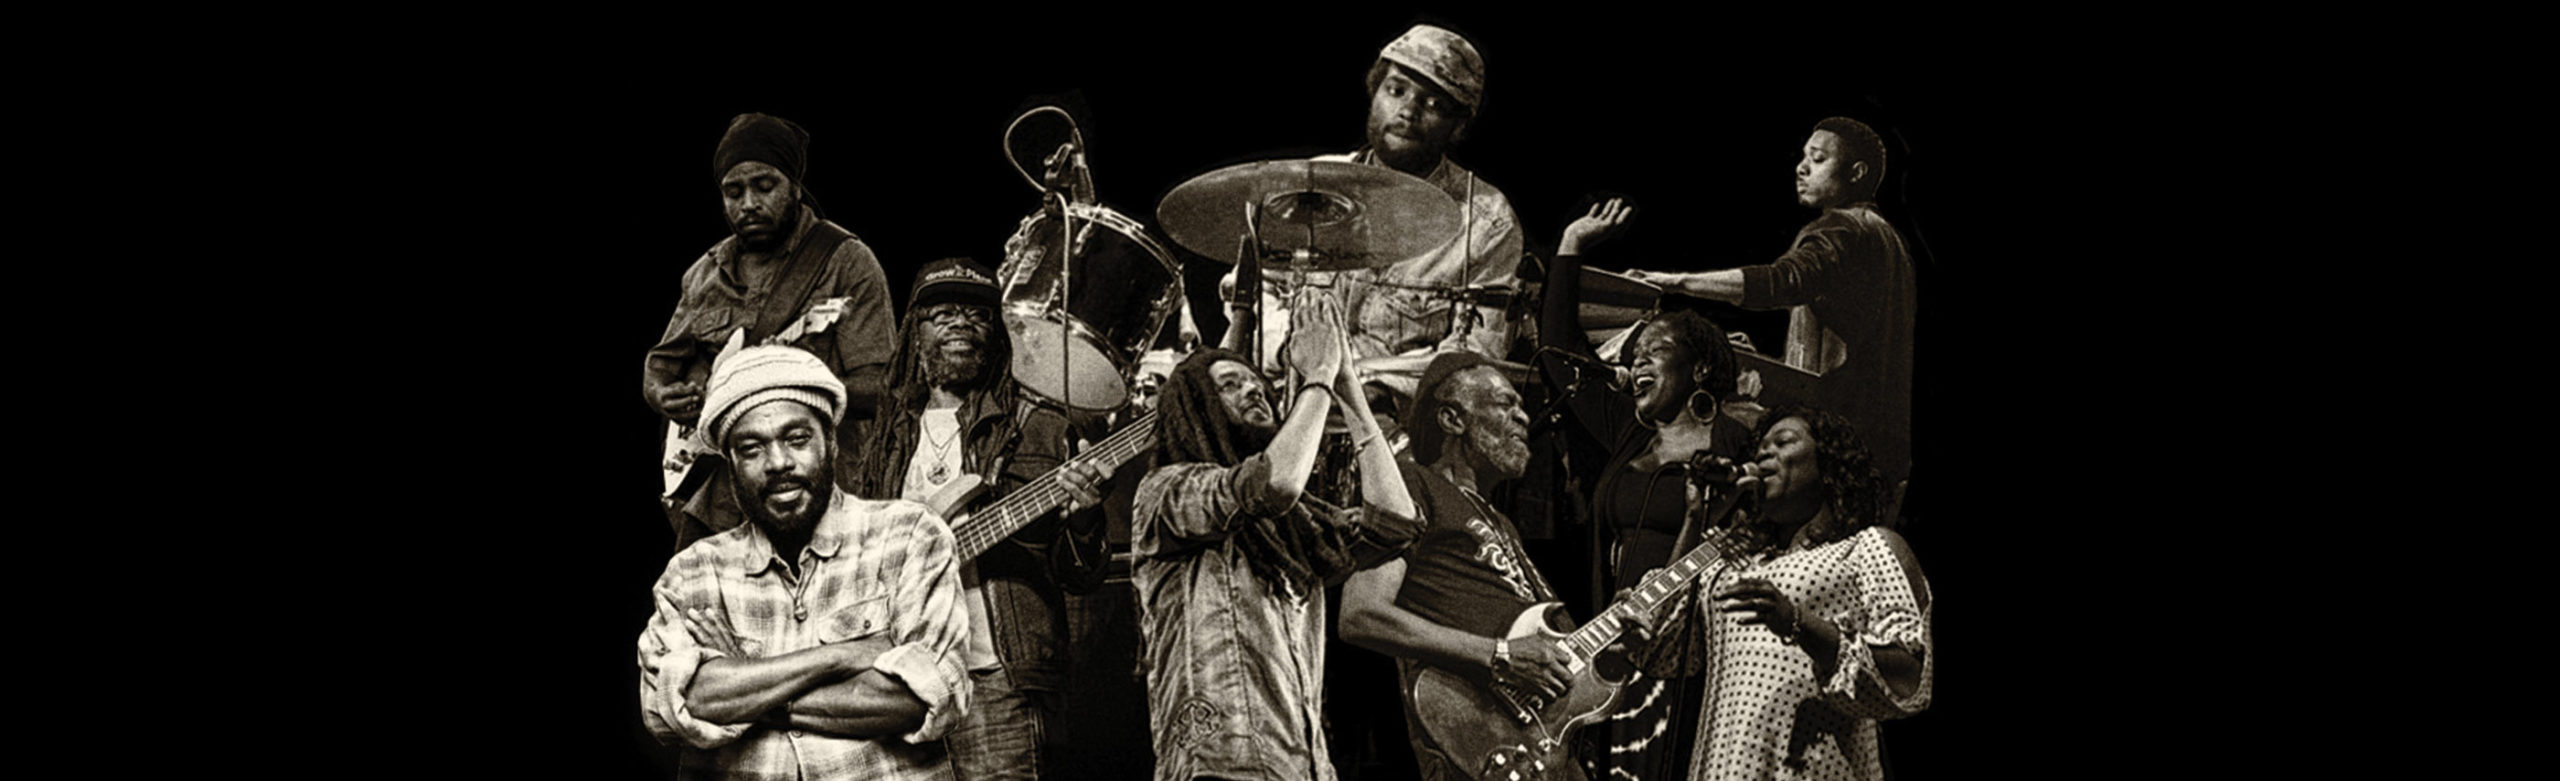 CANCELLED: The Wailers